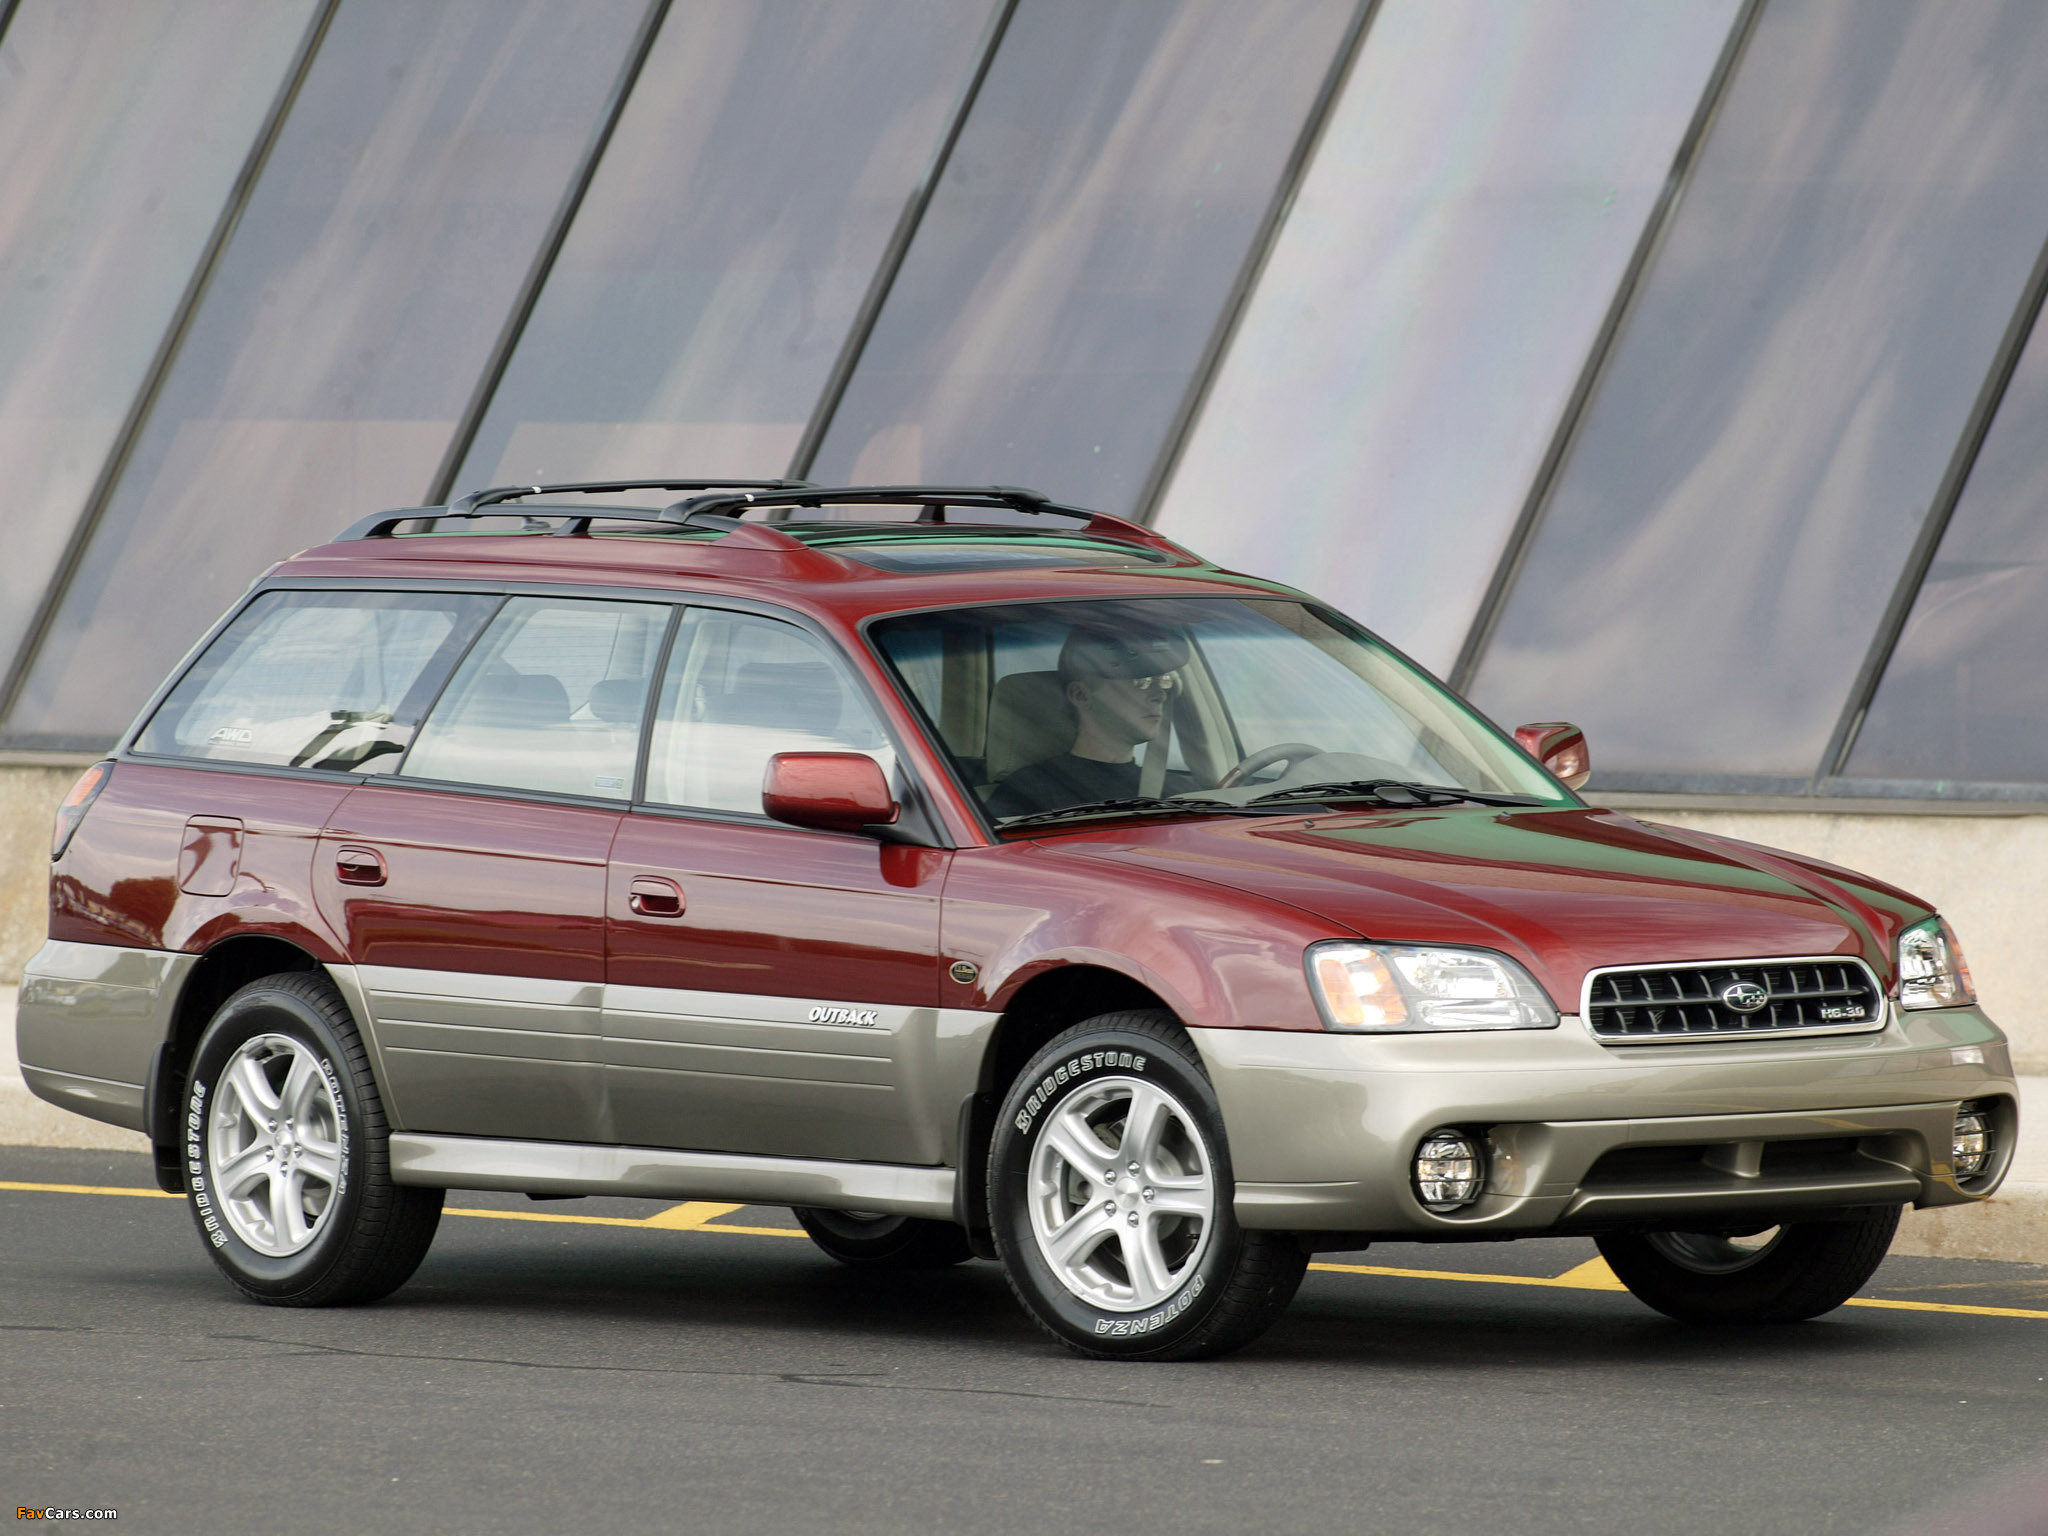 Subaru Outback H63.0 USspec 200003 wallpapers (2048x1536)